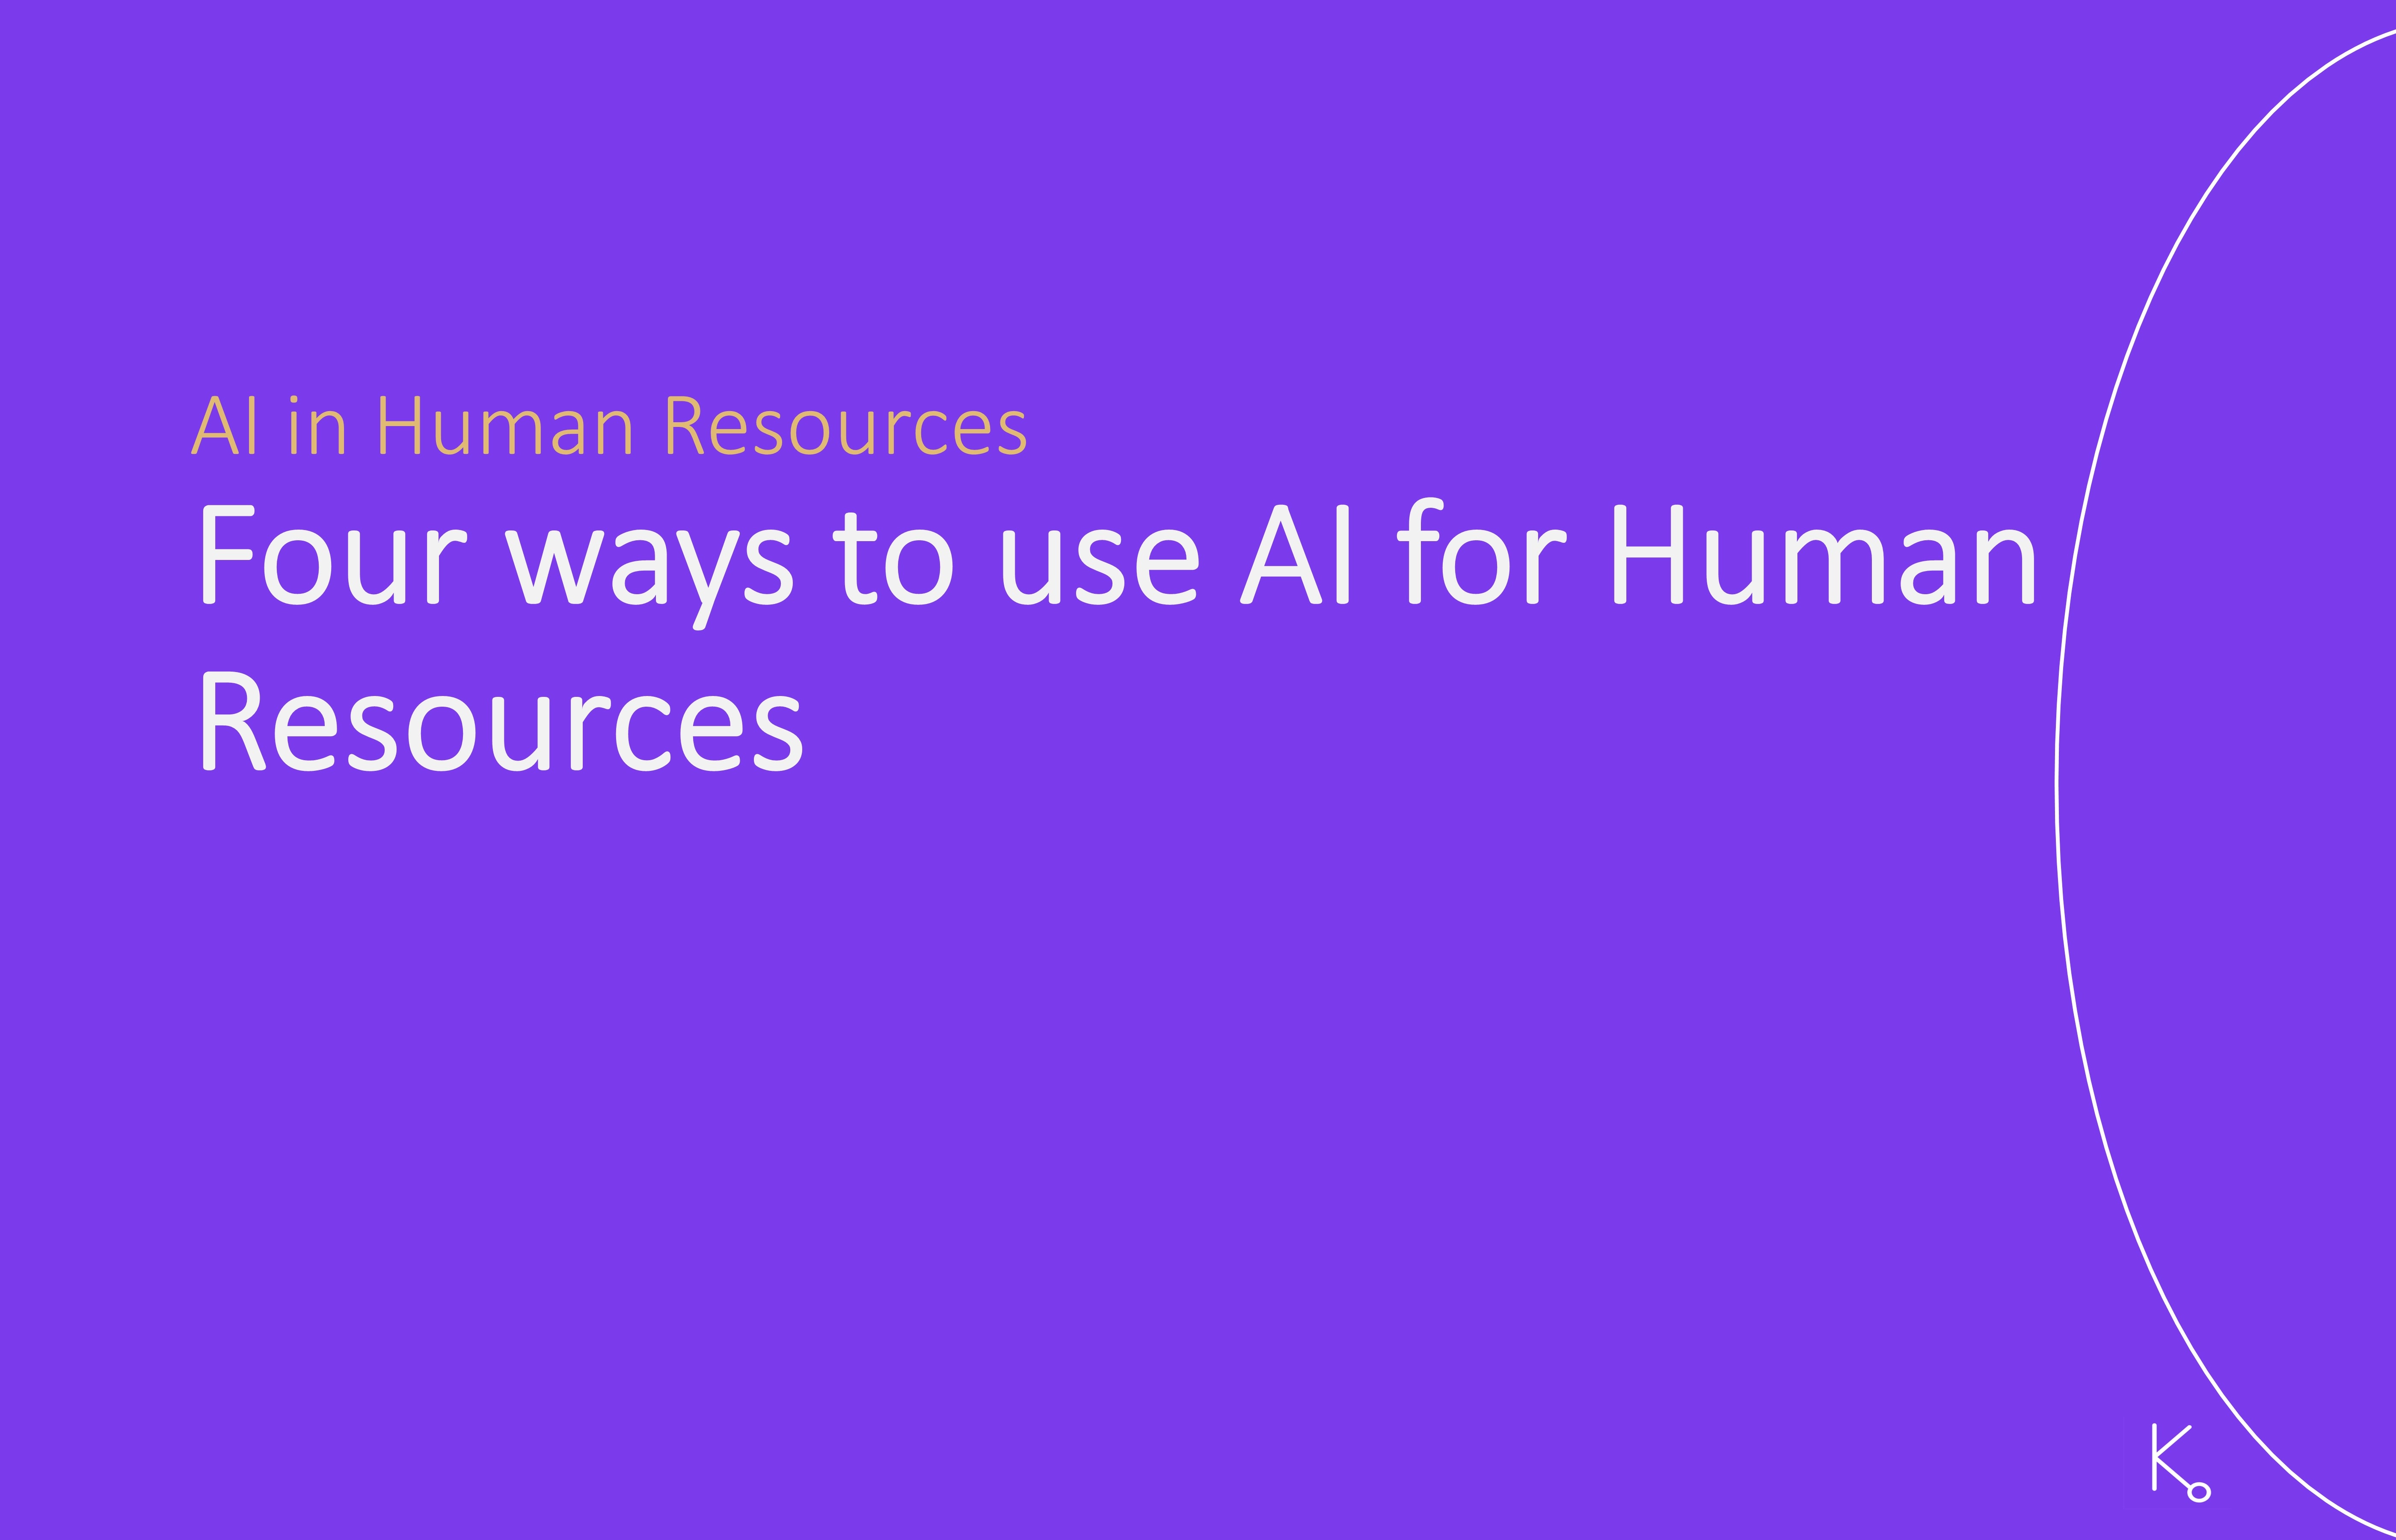 Four ways to use AI for Human Resources